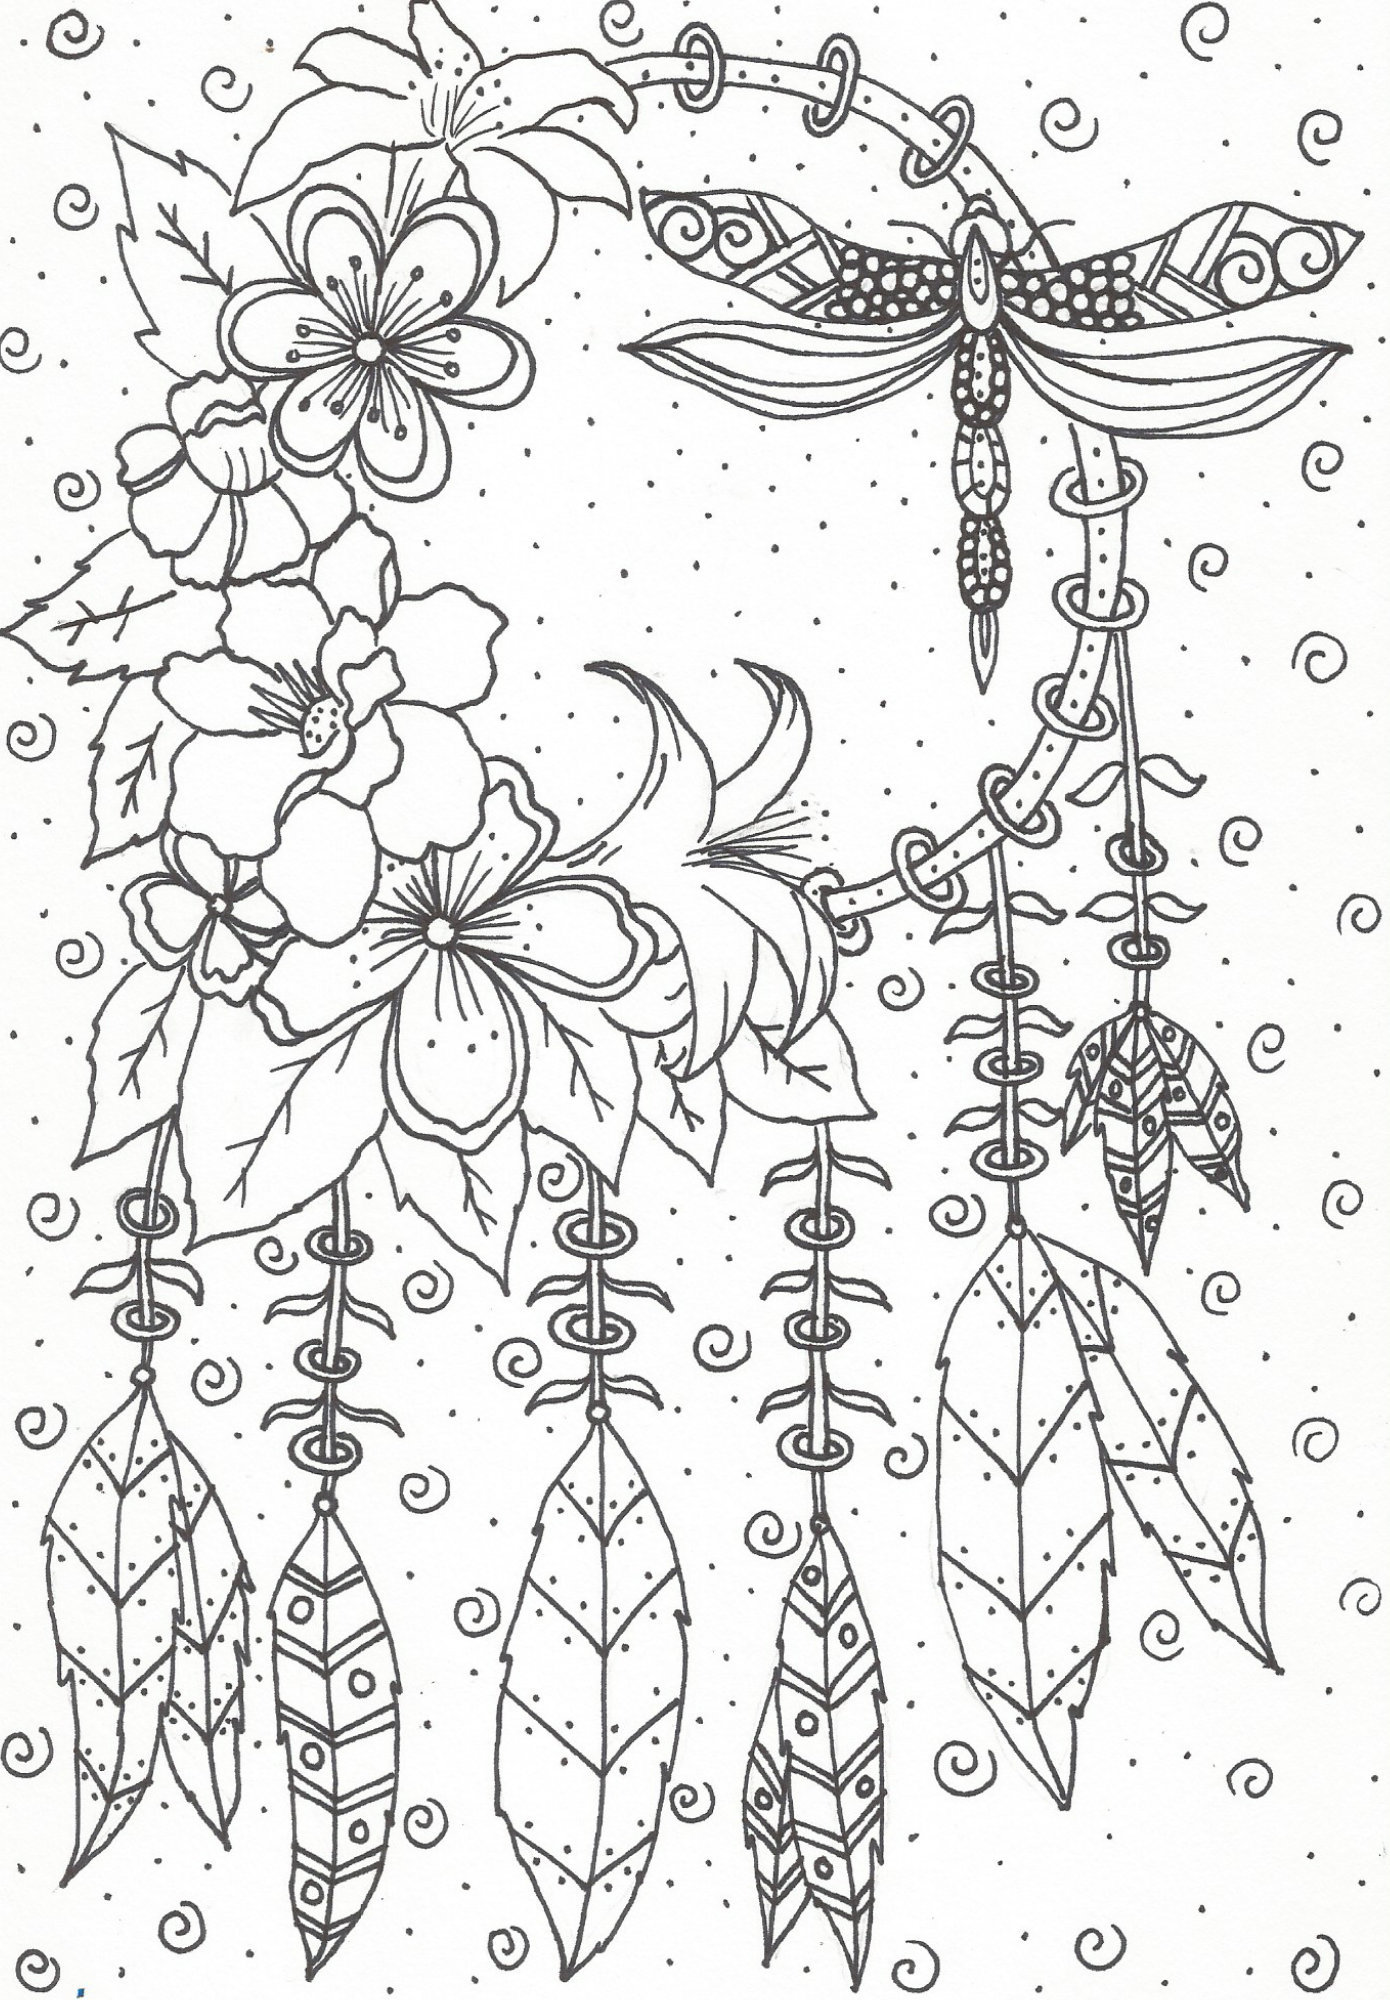 Dream catcher coloring pages pdf download now